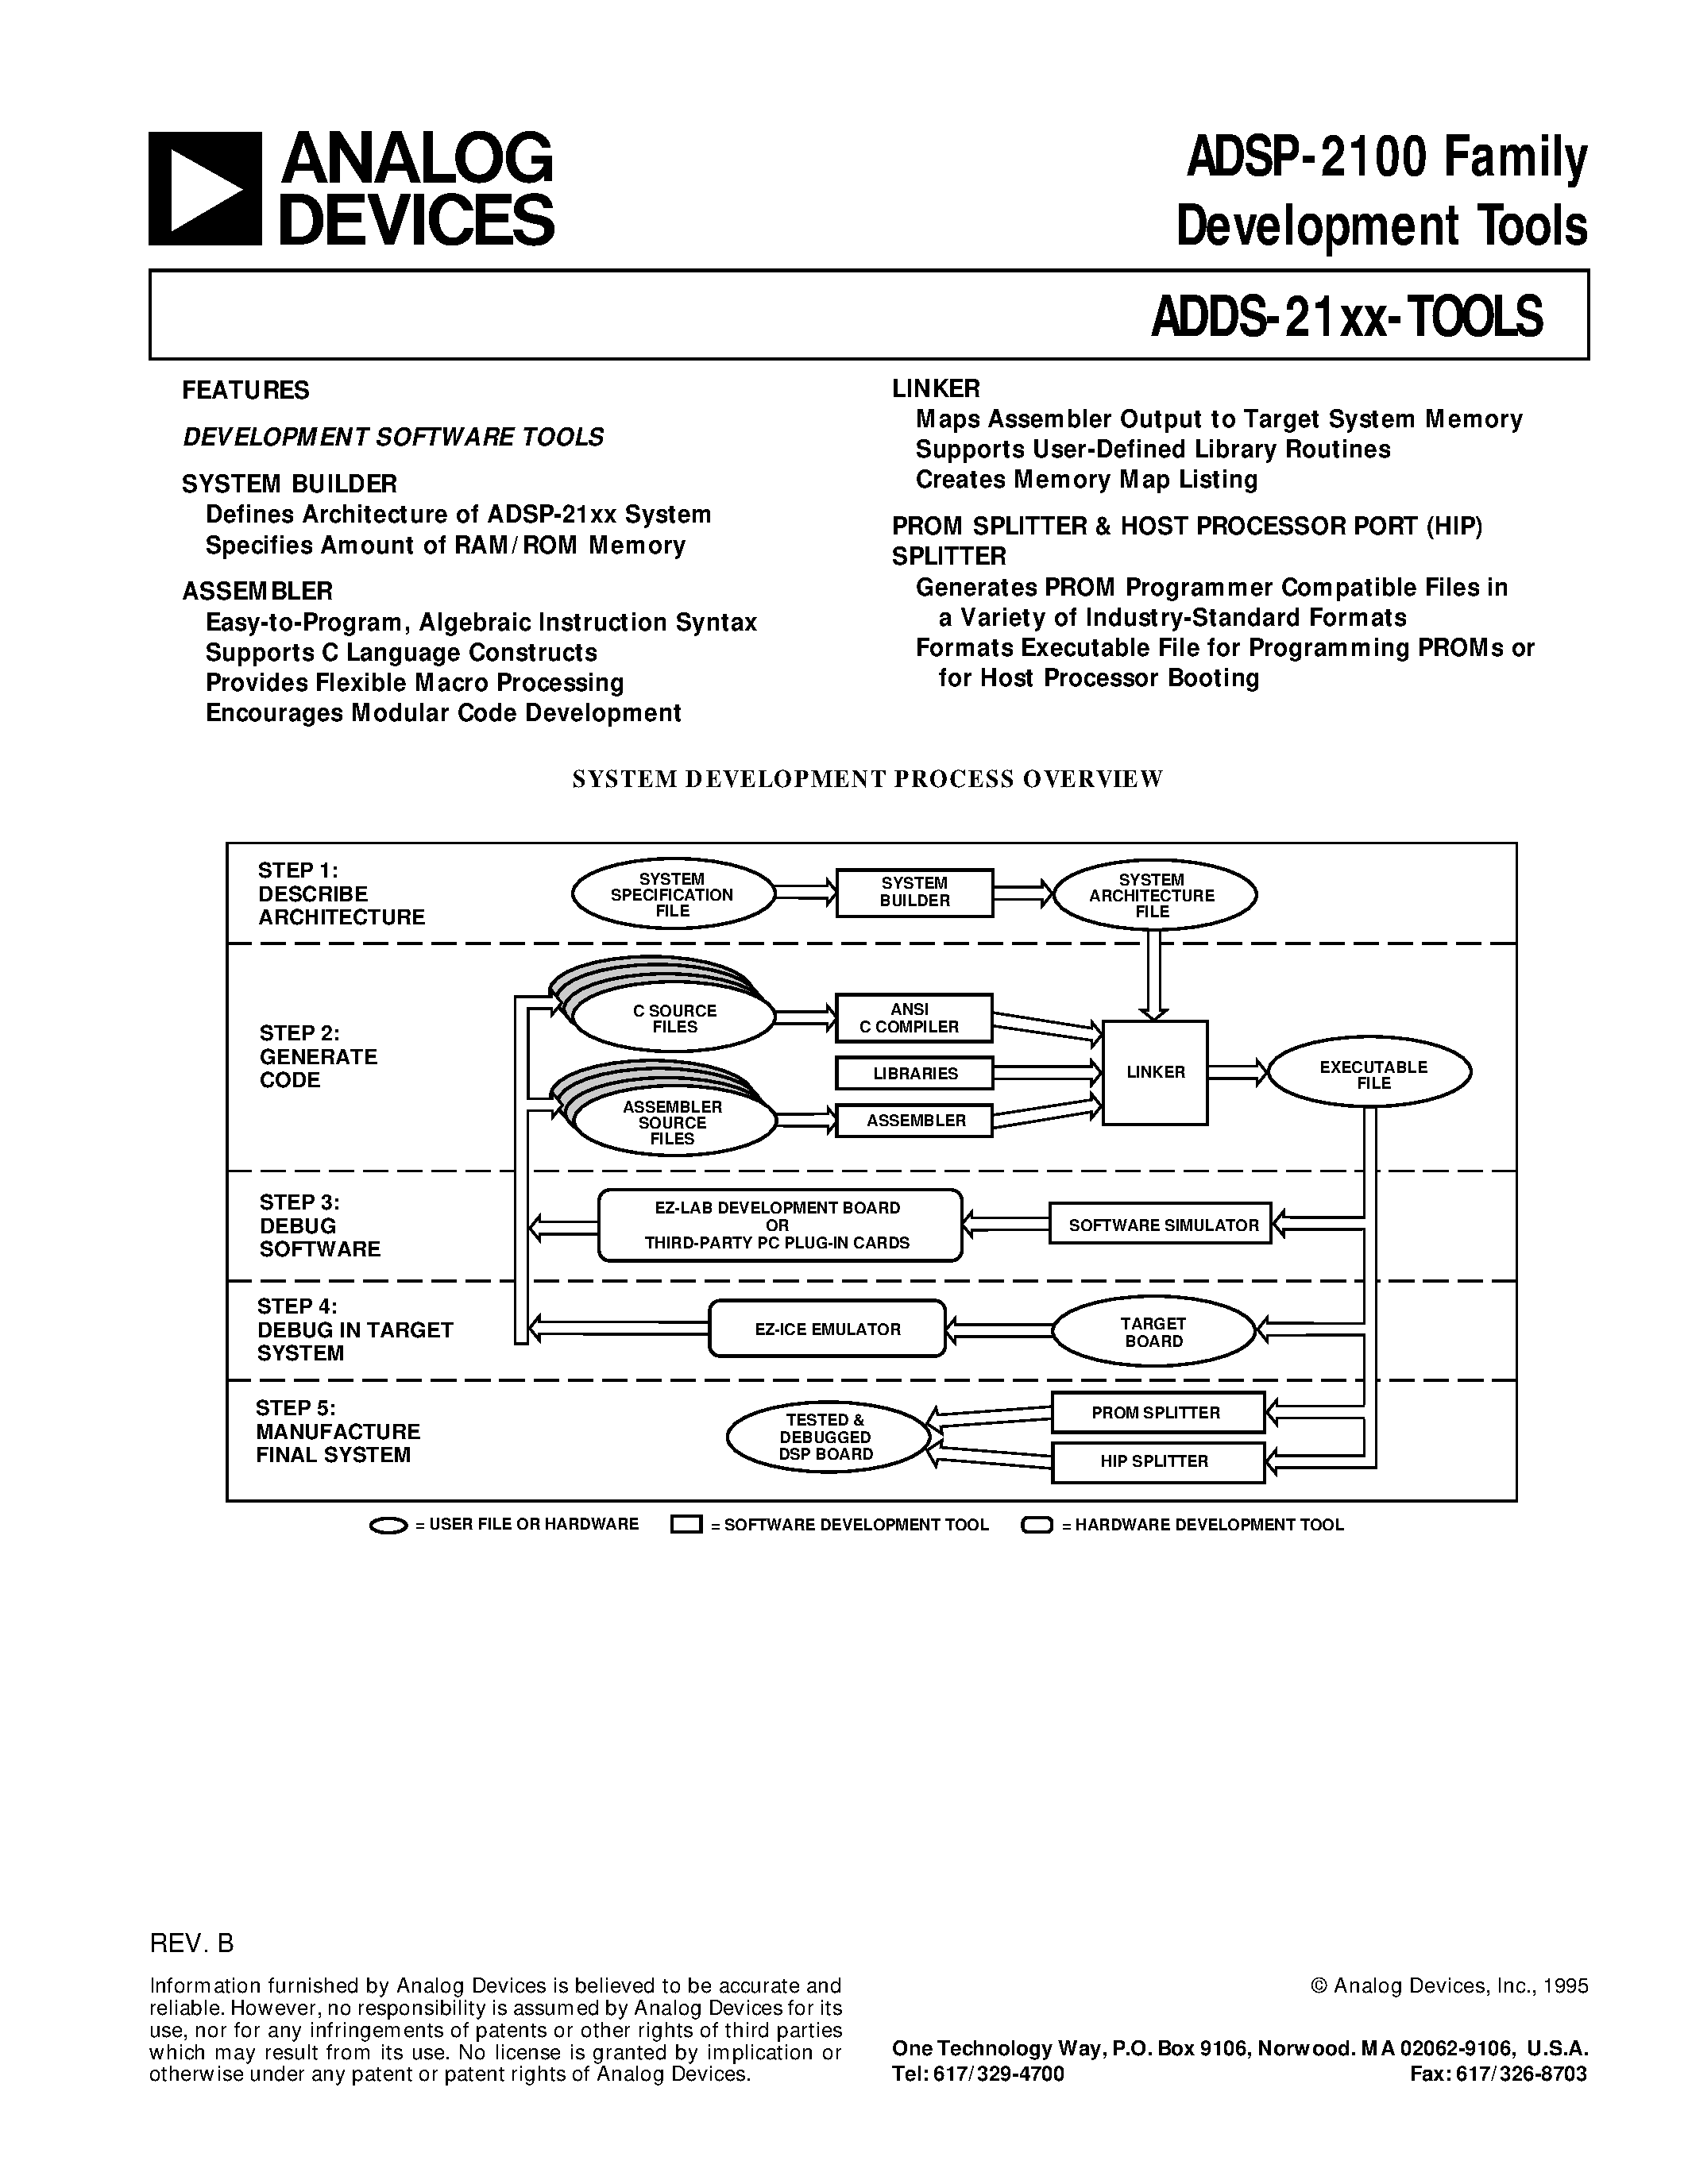 Datasheet ADDS-2101-EZ-LAB - ADSP-2100 Family Development Tools page 1